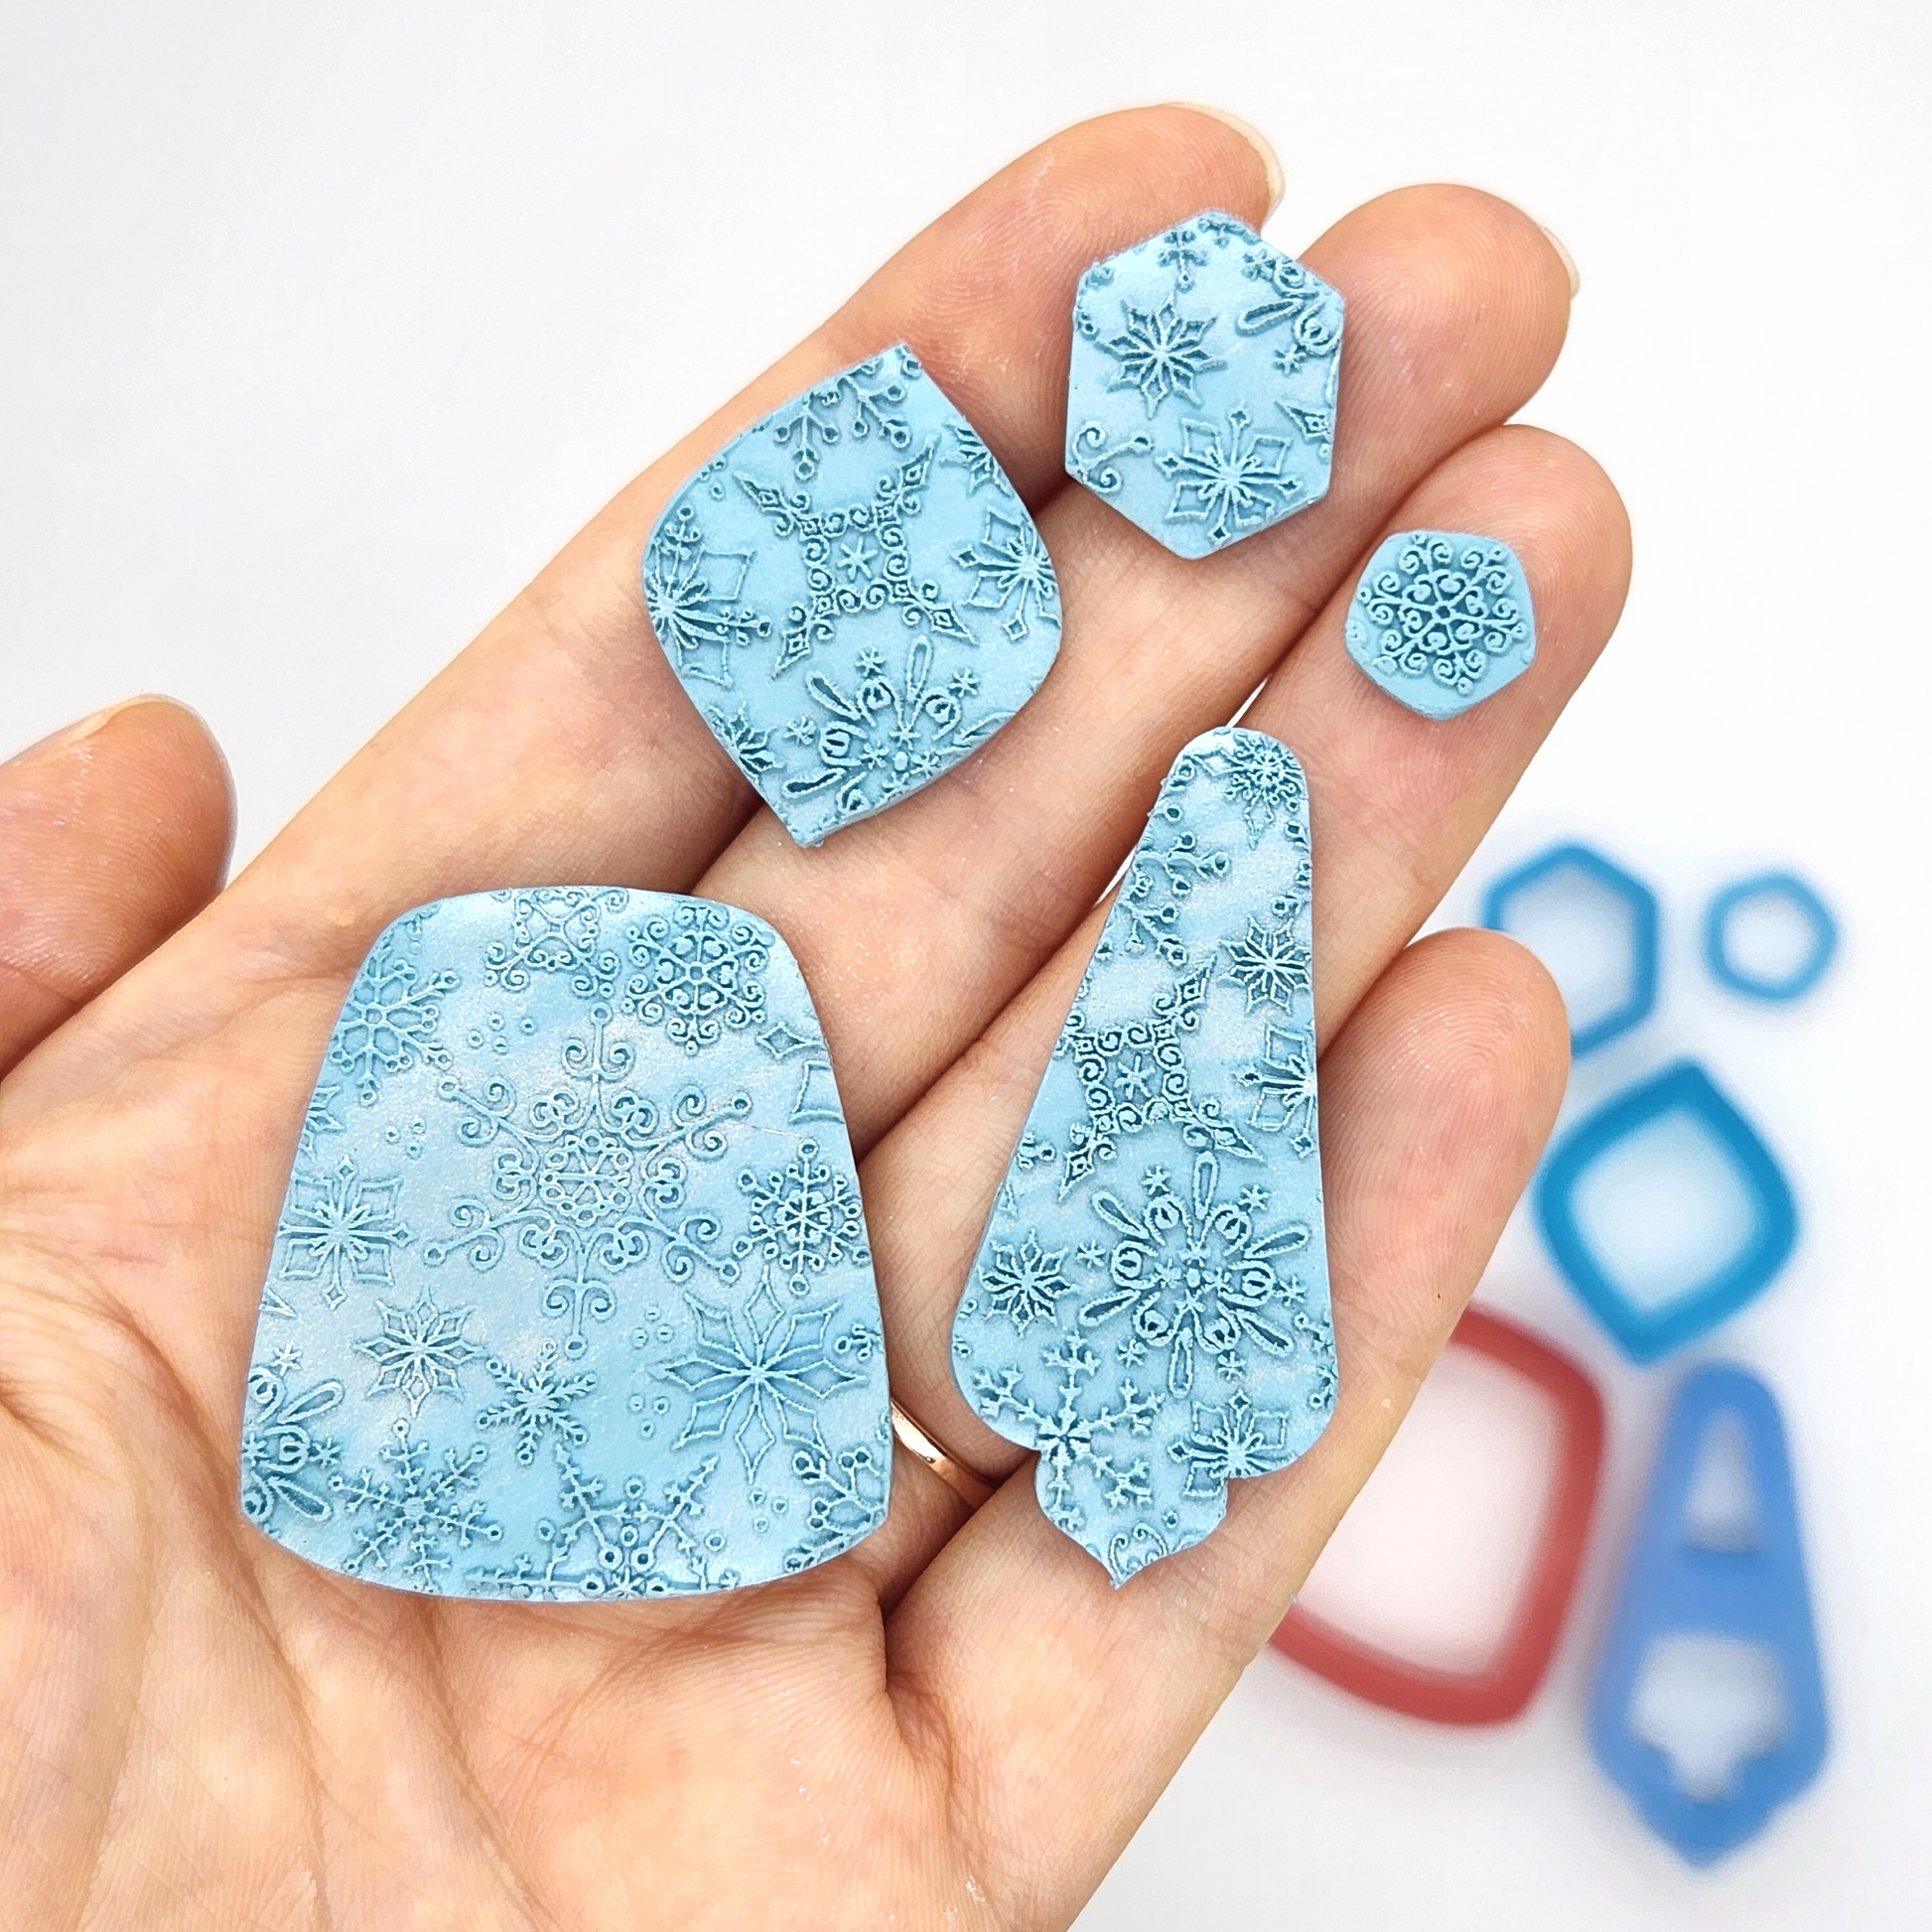 Winter Christmas Frozen Snowflake Polymer Clay Shapes Earrings Jewelry Pendant Charms and Ornaments Crafts